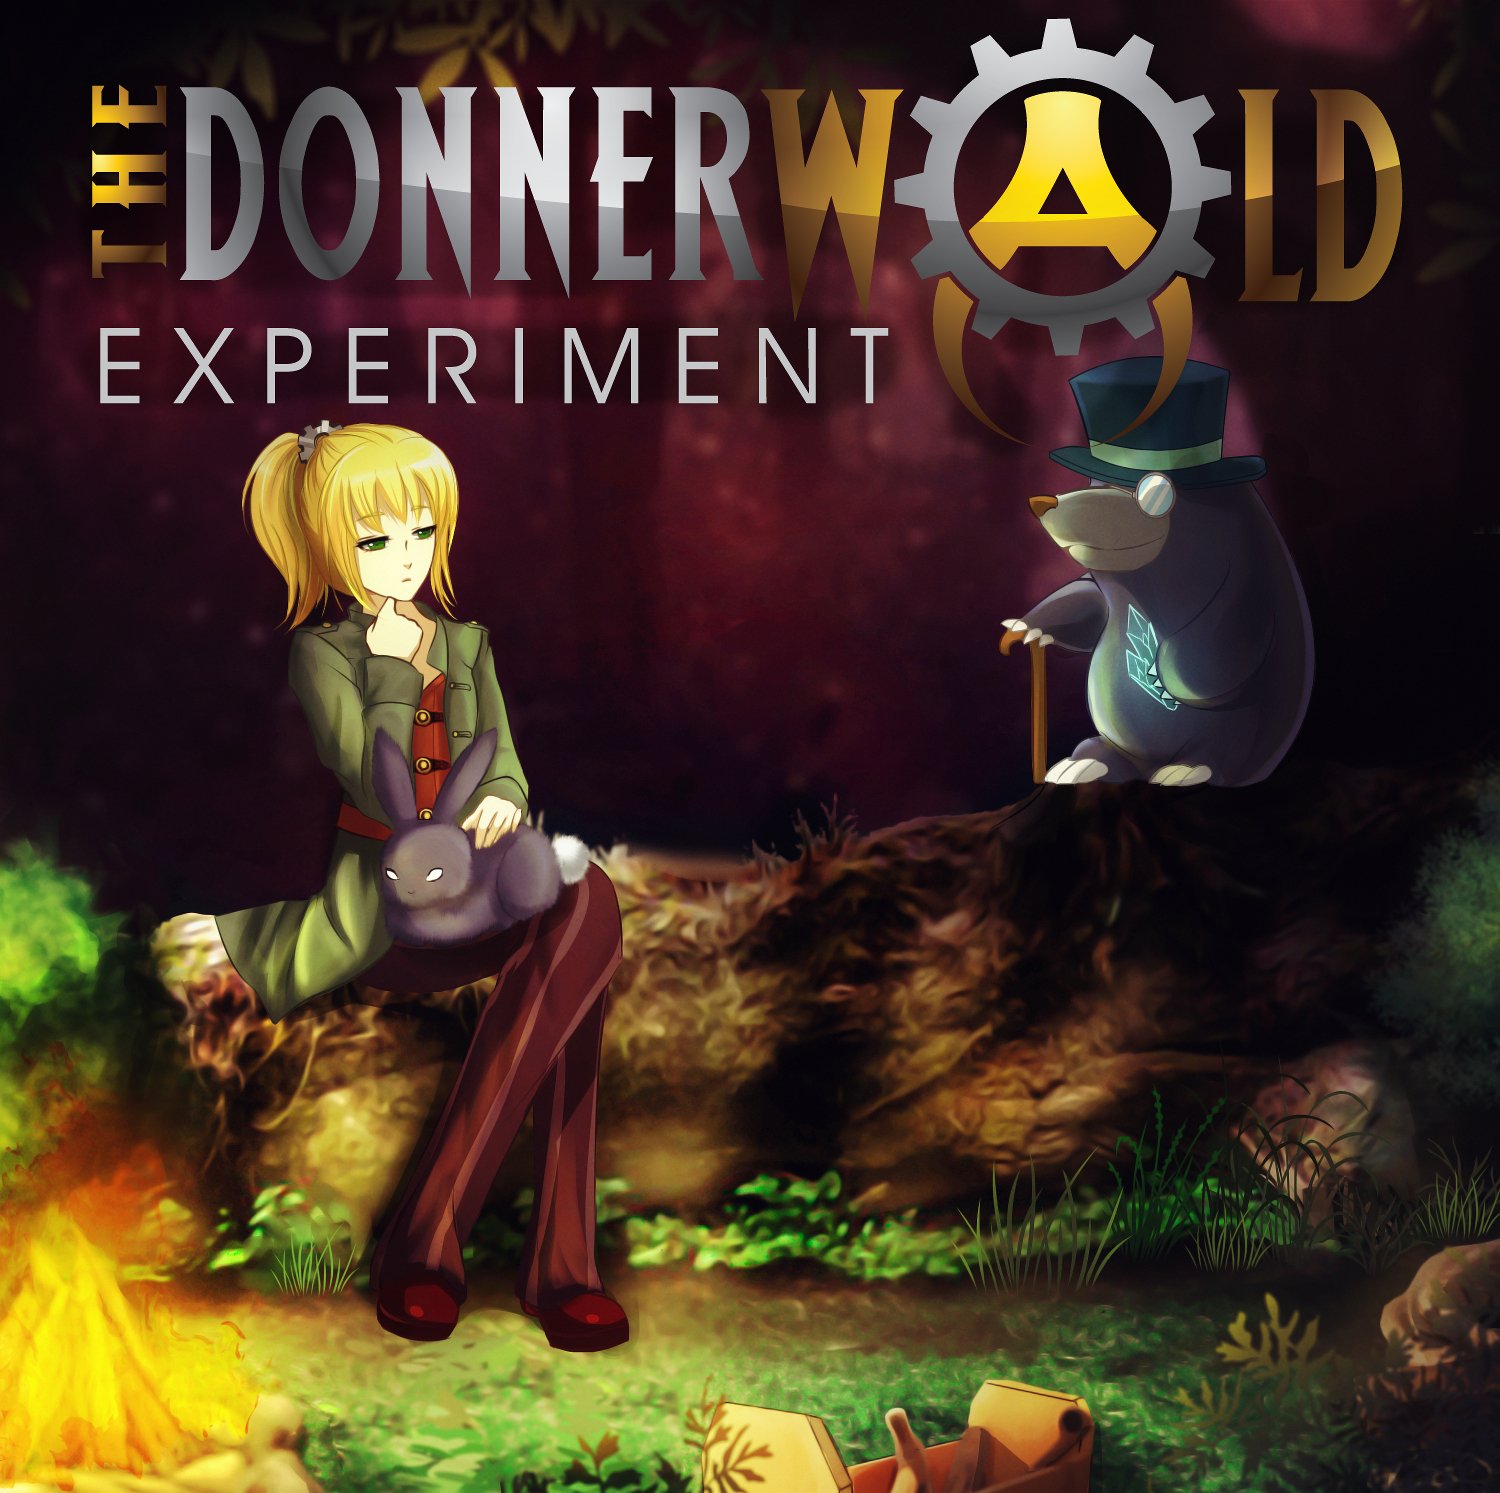 Image of The Donnerwald Experiment